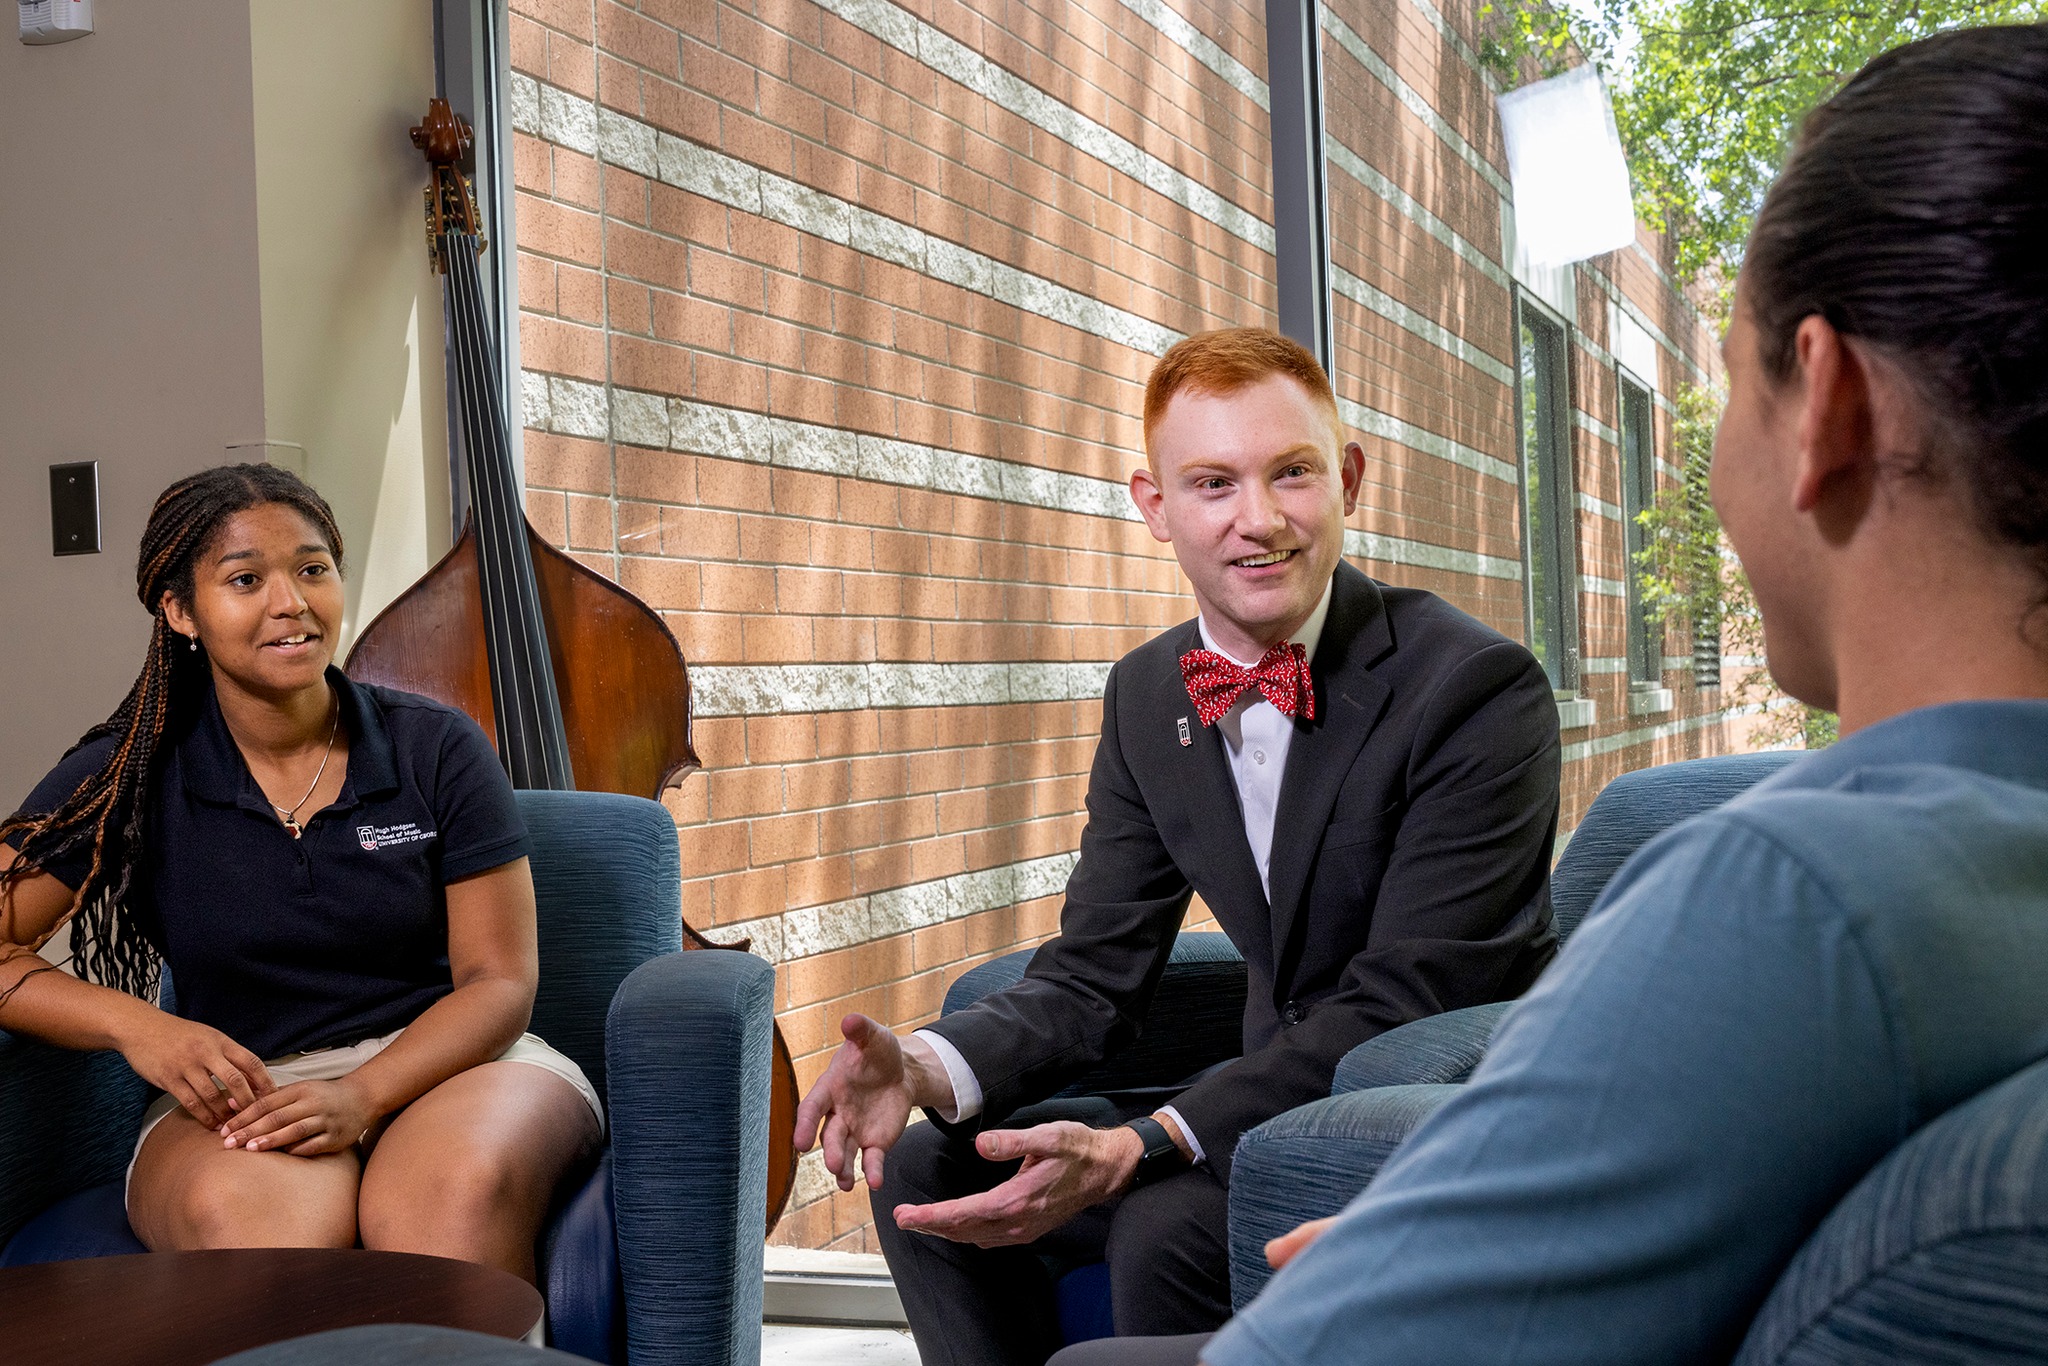 Undergraduate students Bianca Wilson, left, and Trey Heaton, right, chat with Marshall Williams, center, in the Hugh Hodgson School of Music building.